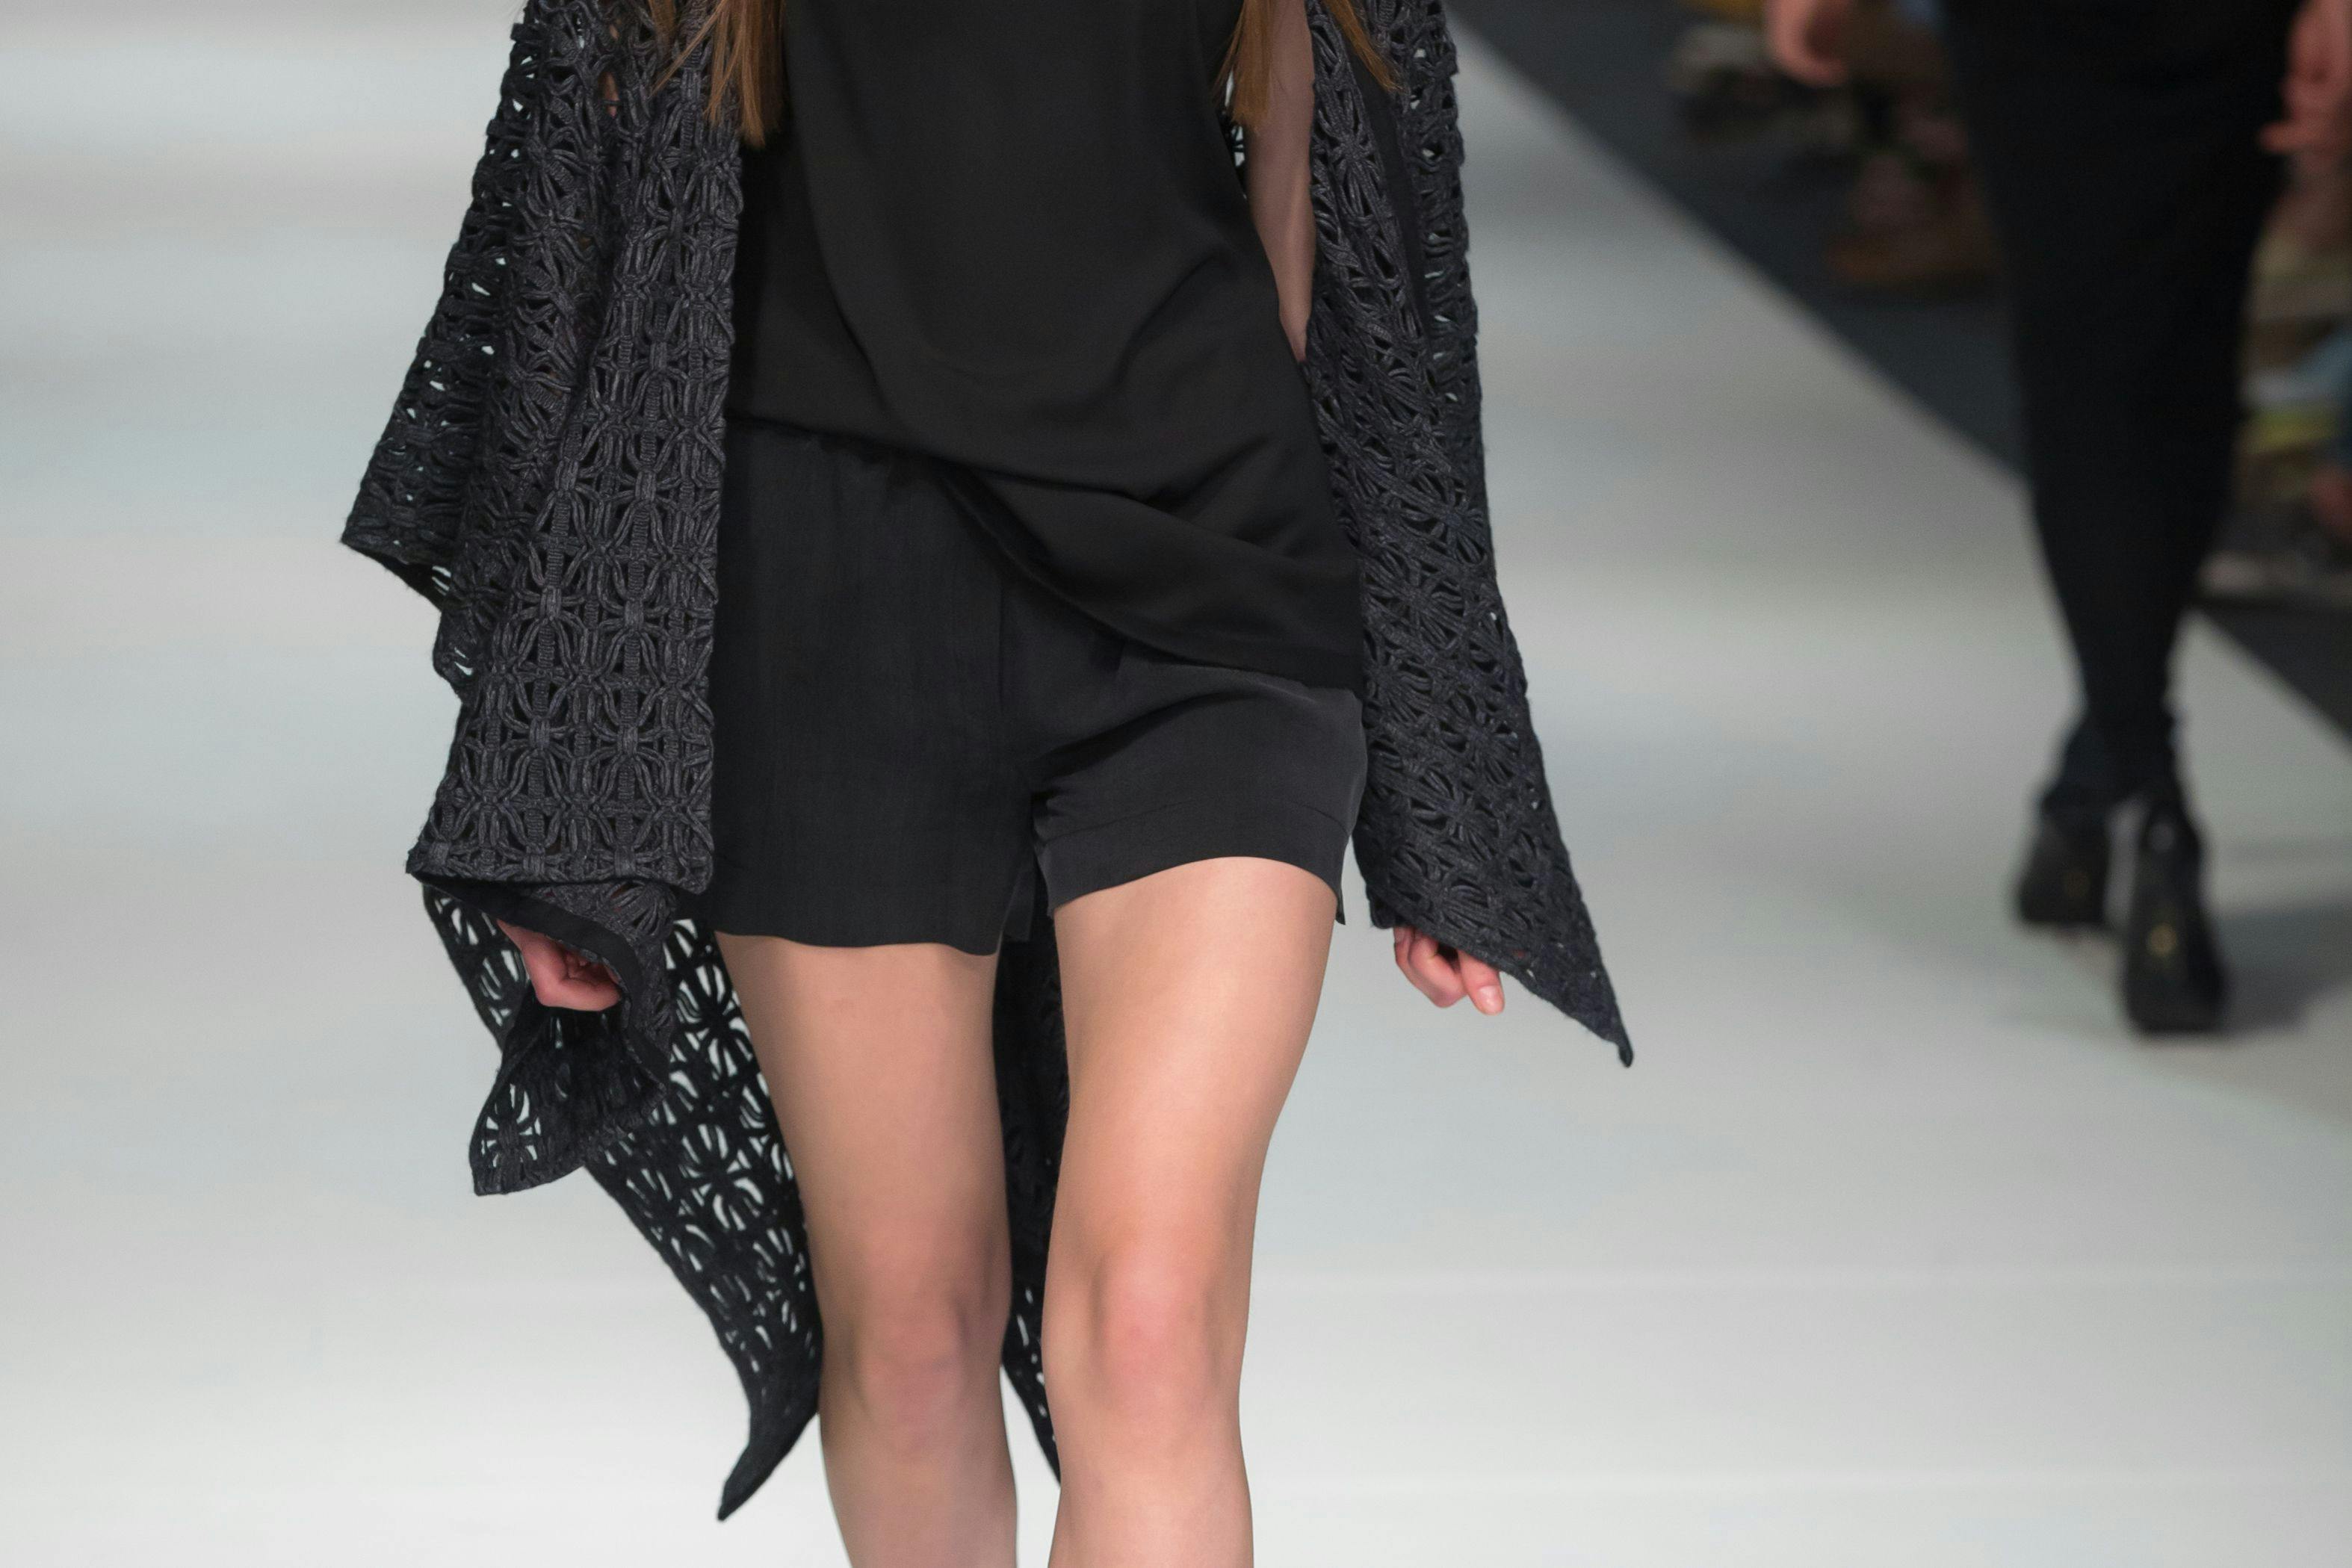  close up details of a woman walking on a fashion runway